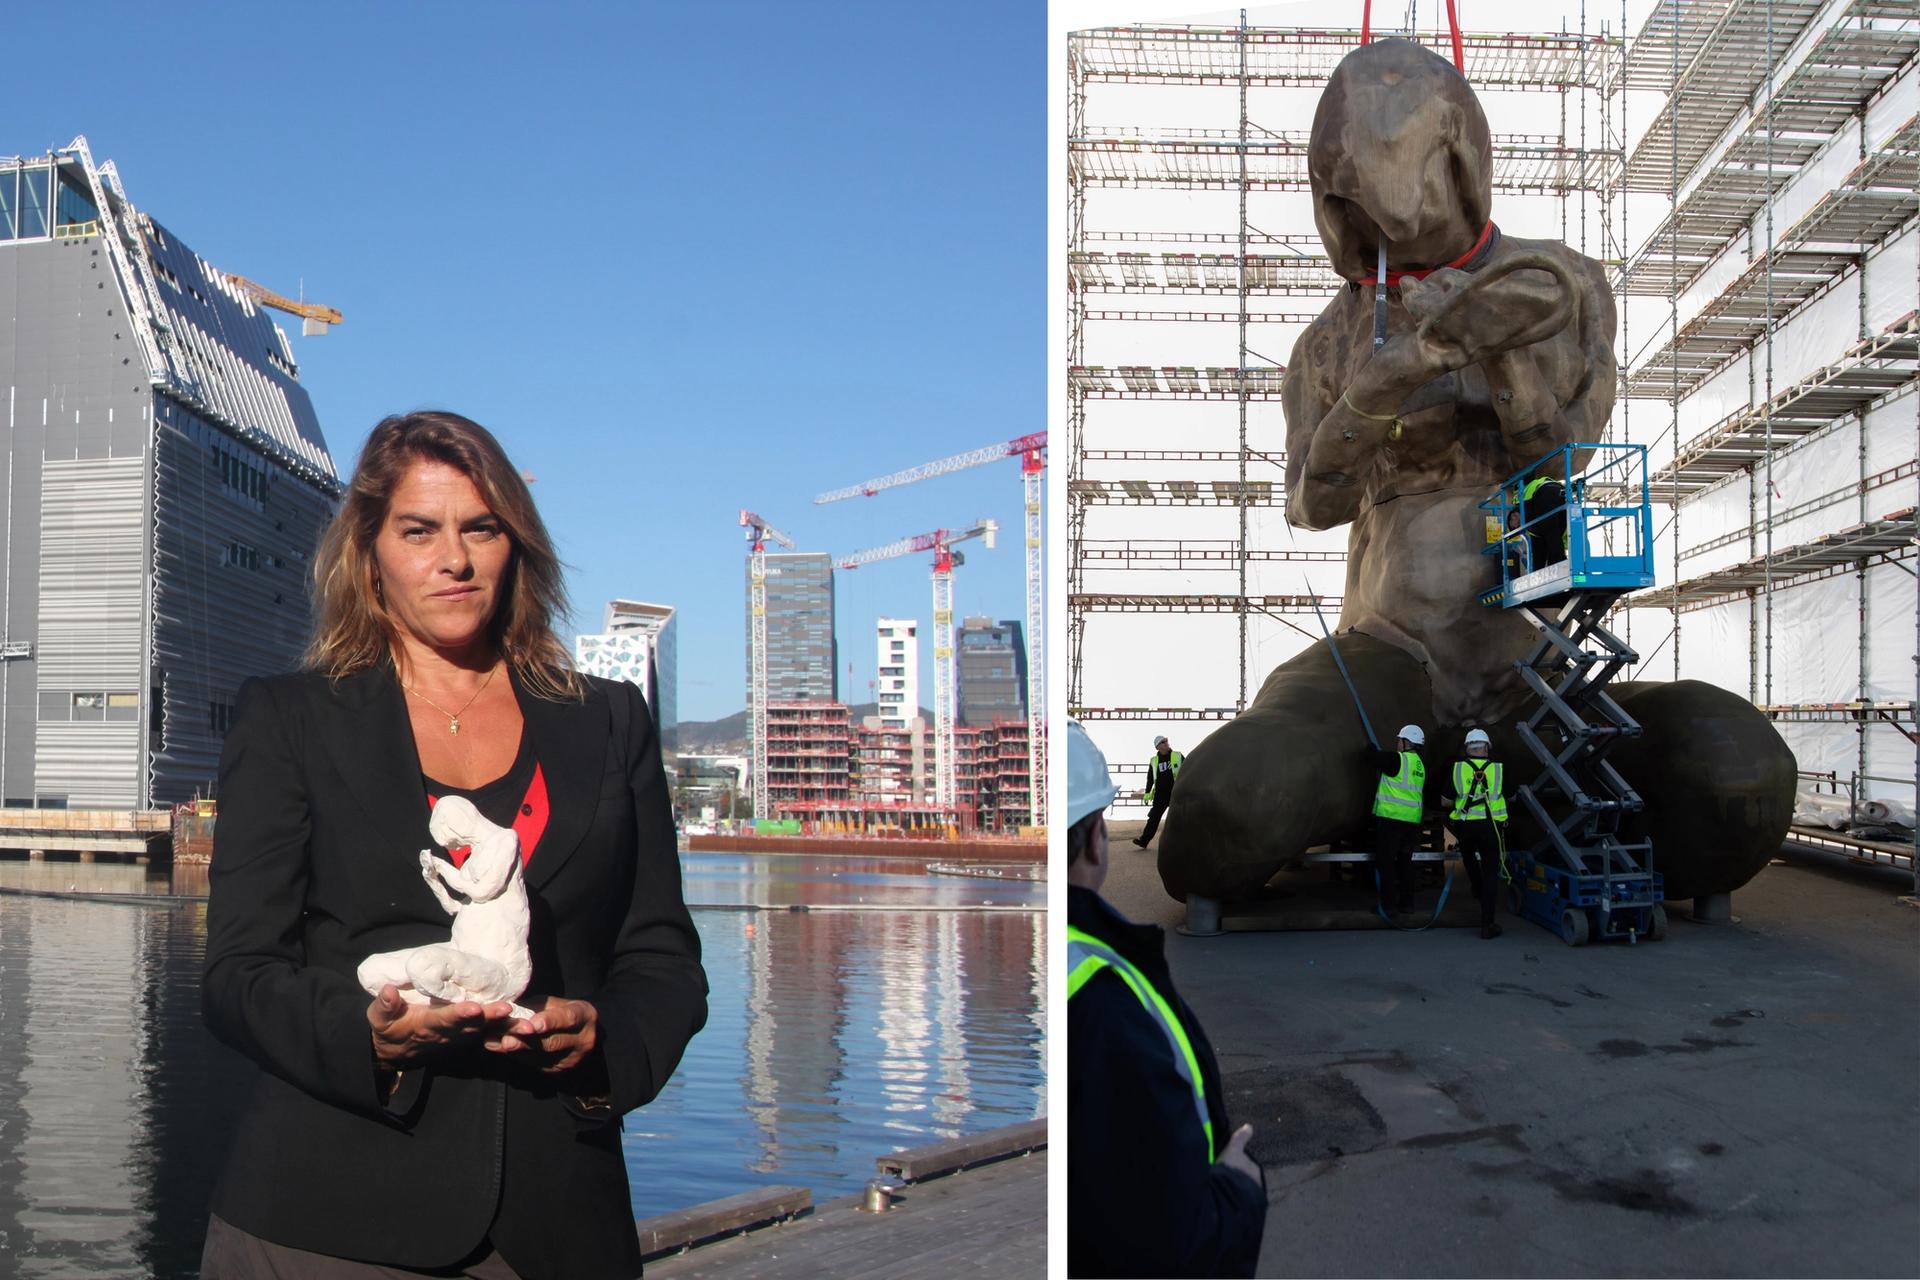 Left: Tracey Emin in front of the Munch Museum in Olso with a maquette of The Mother. Right: The pieces of The Mother being assembled in-situ Emin: Alv Gustavsen, Agency of cultural affairs, the City of Oslo; The Mother: Ingvild B. Myklebust, Agency of culture affairs, City of Oslo